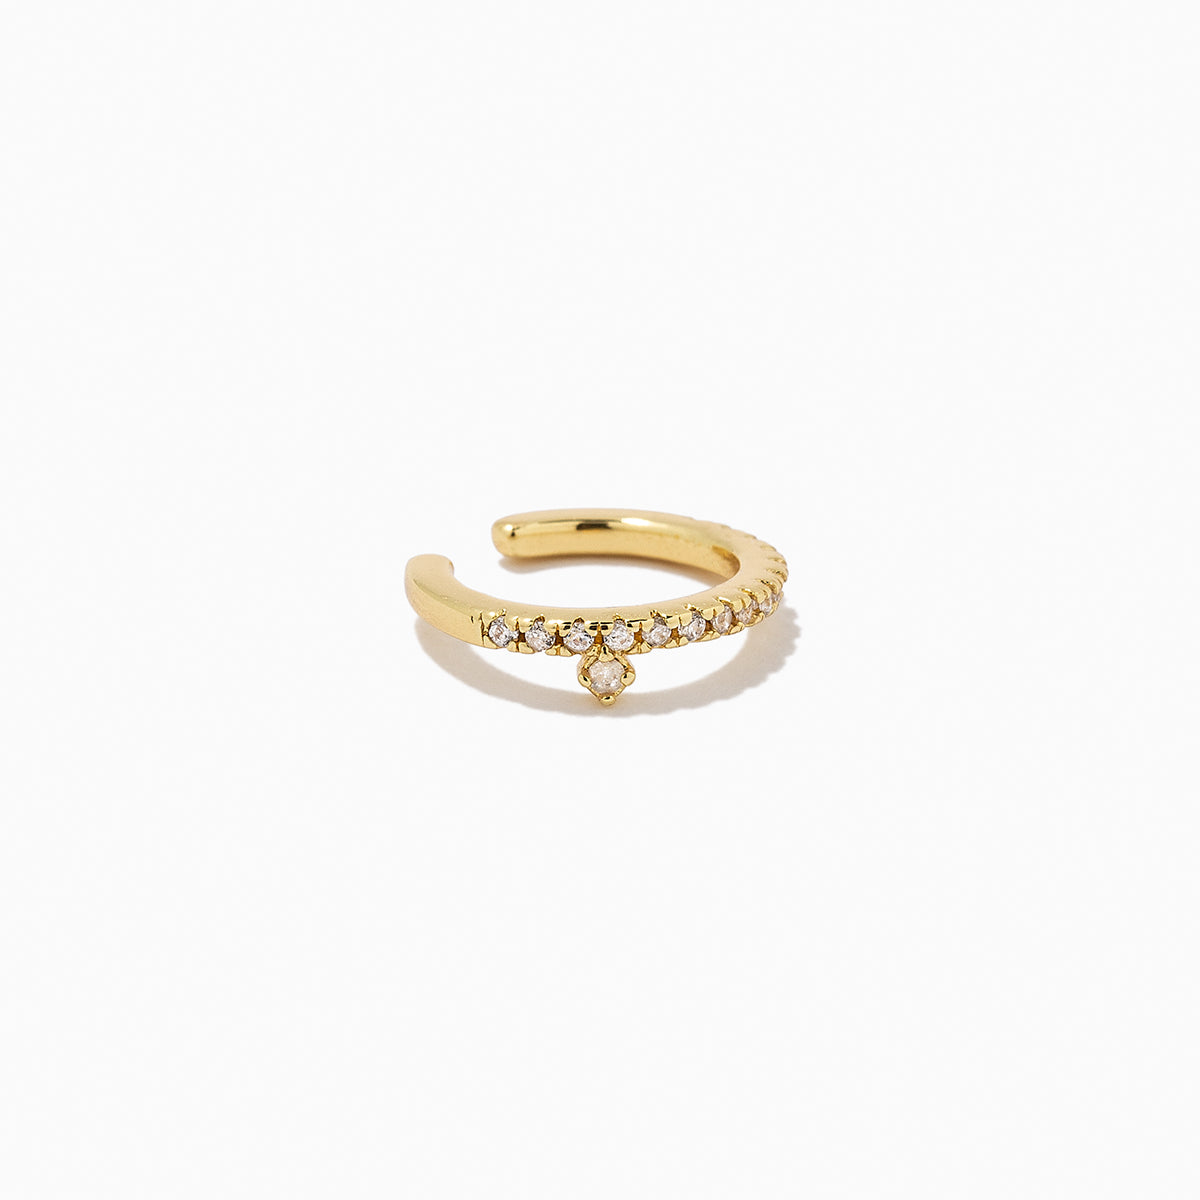 Undeniable Ear Cuff | Gold | Product Image | Uncommon James